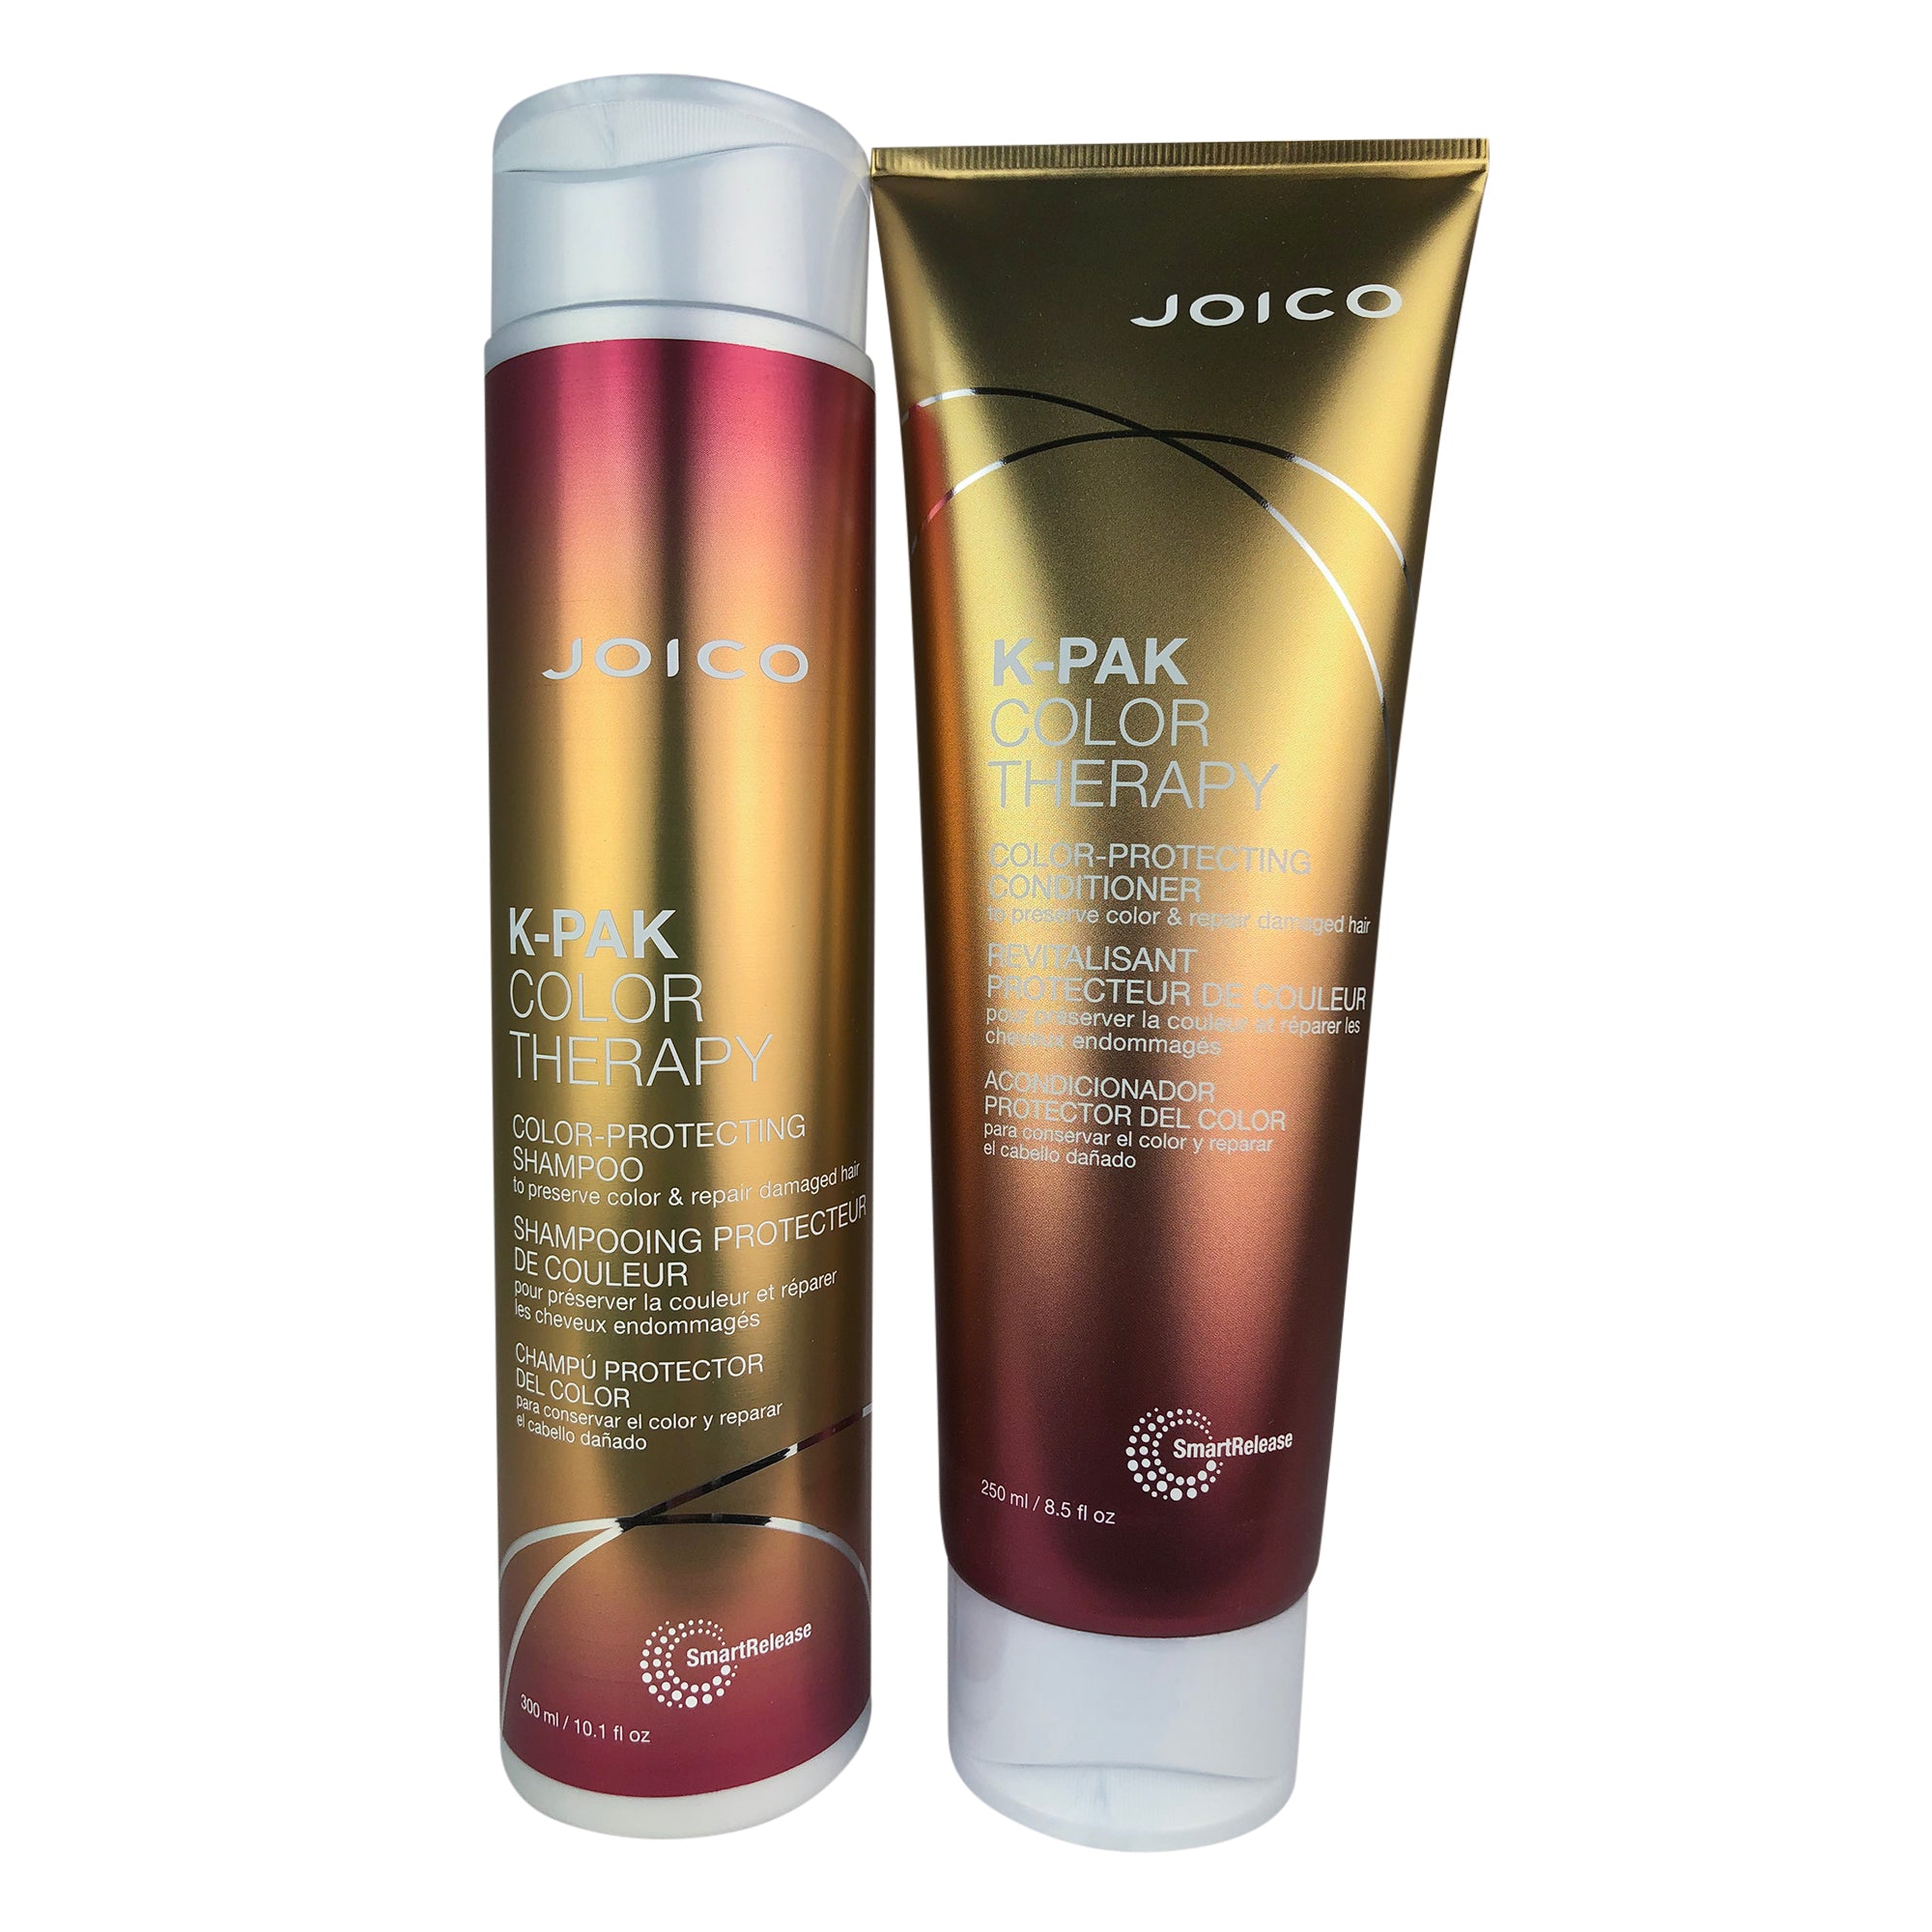 Joico K-Pak Color Therapy Shampoo and Conditioner Duo 10.1 oz